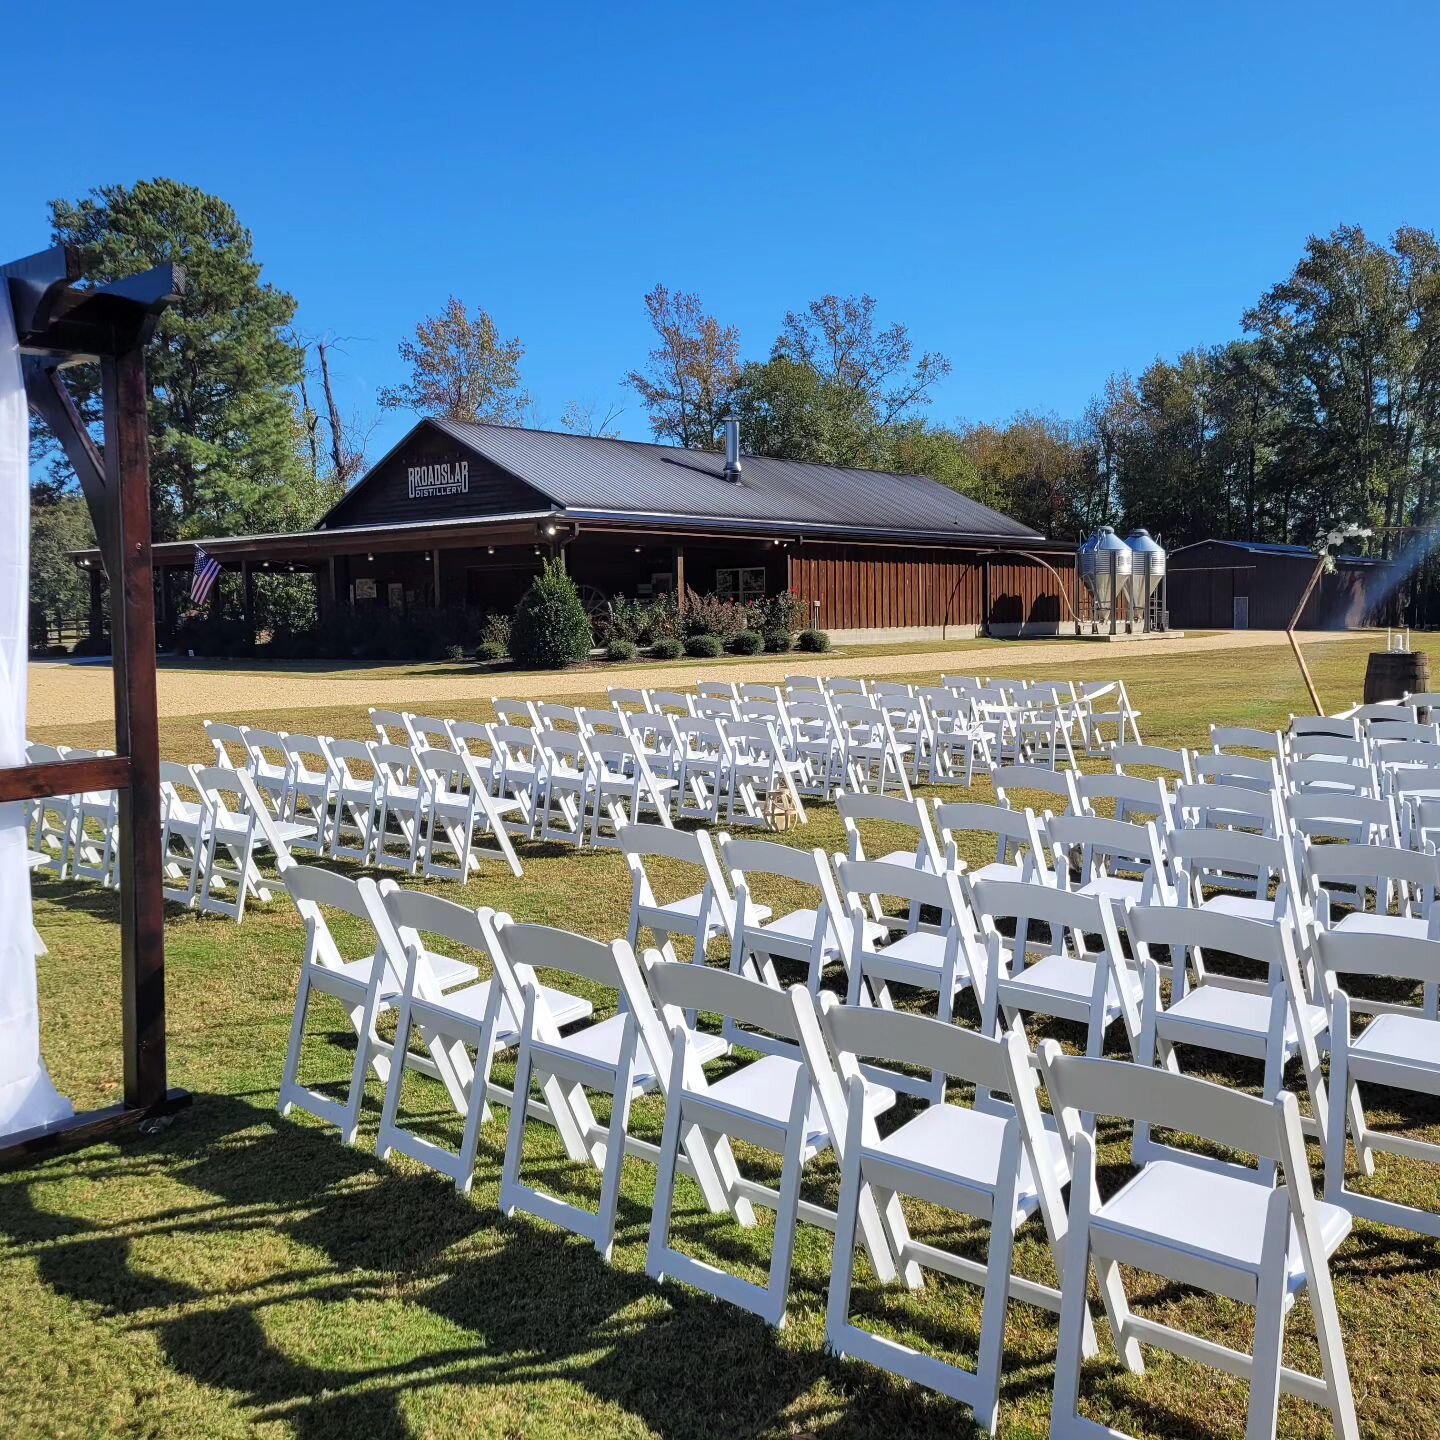 Time for a wedding here in Benson NC !